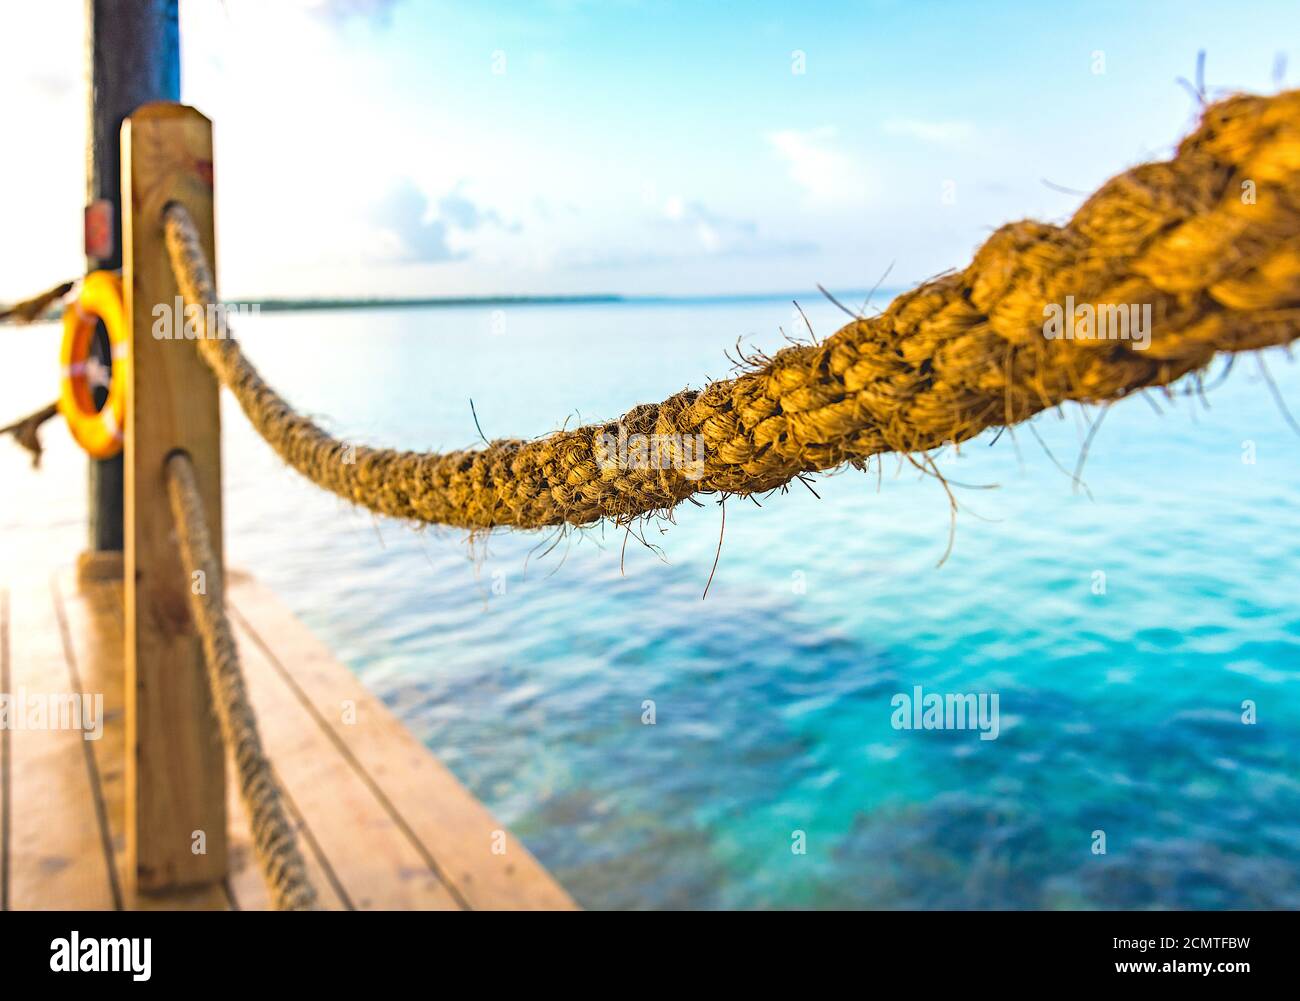 hot tropical day the Caribbean sea pier with pergola Stock Photo